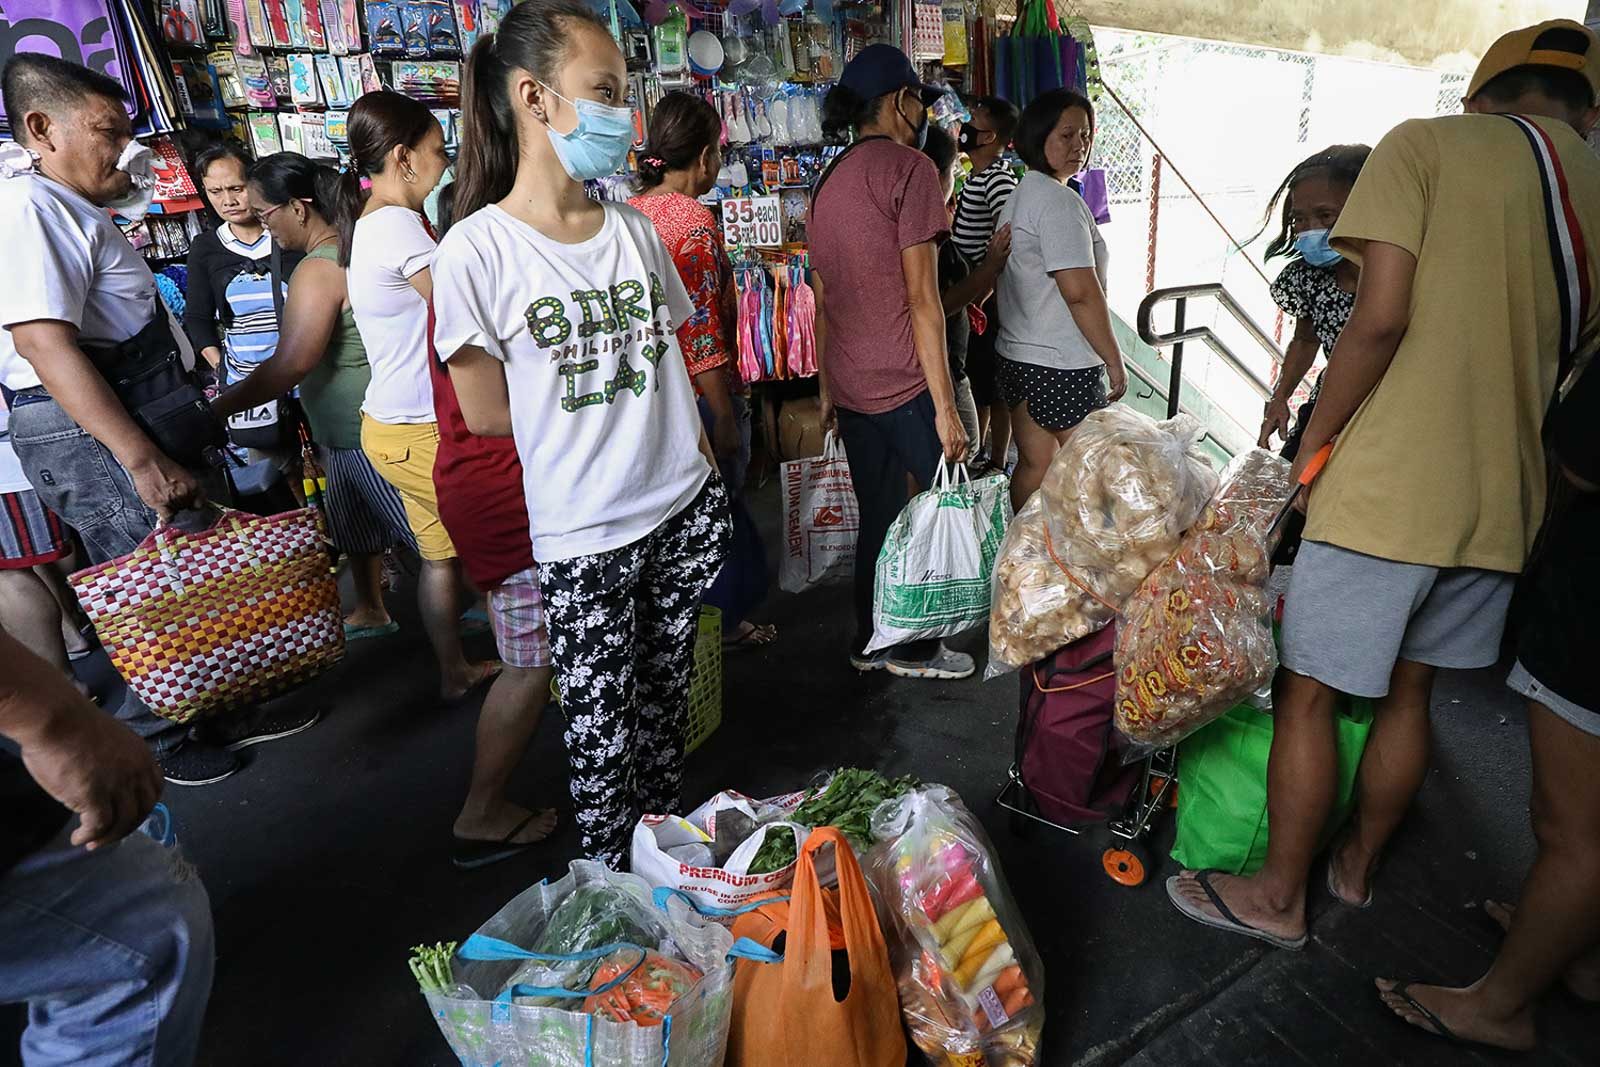 DILG to LGUs: Realign your budgets to feed more during Luzon lockdown